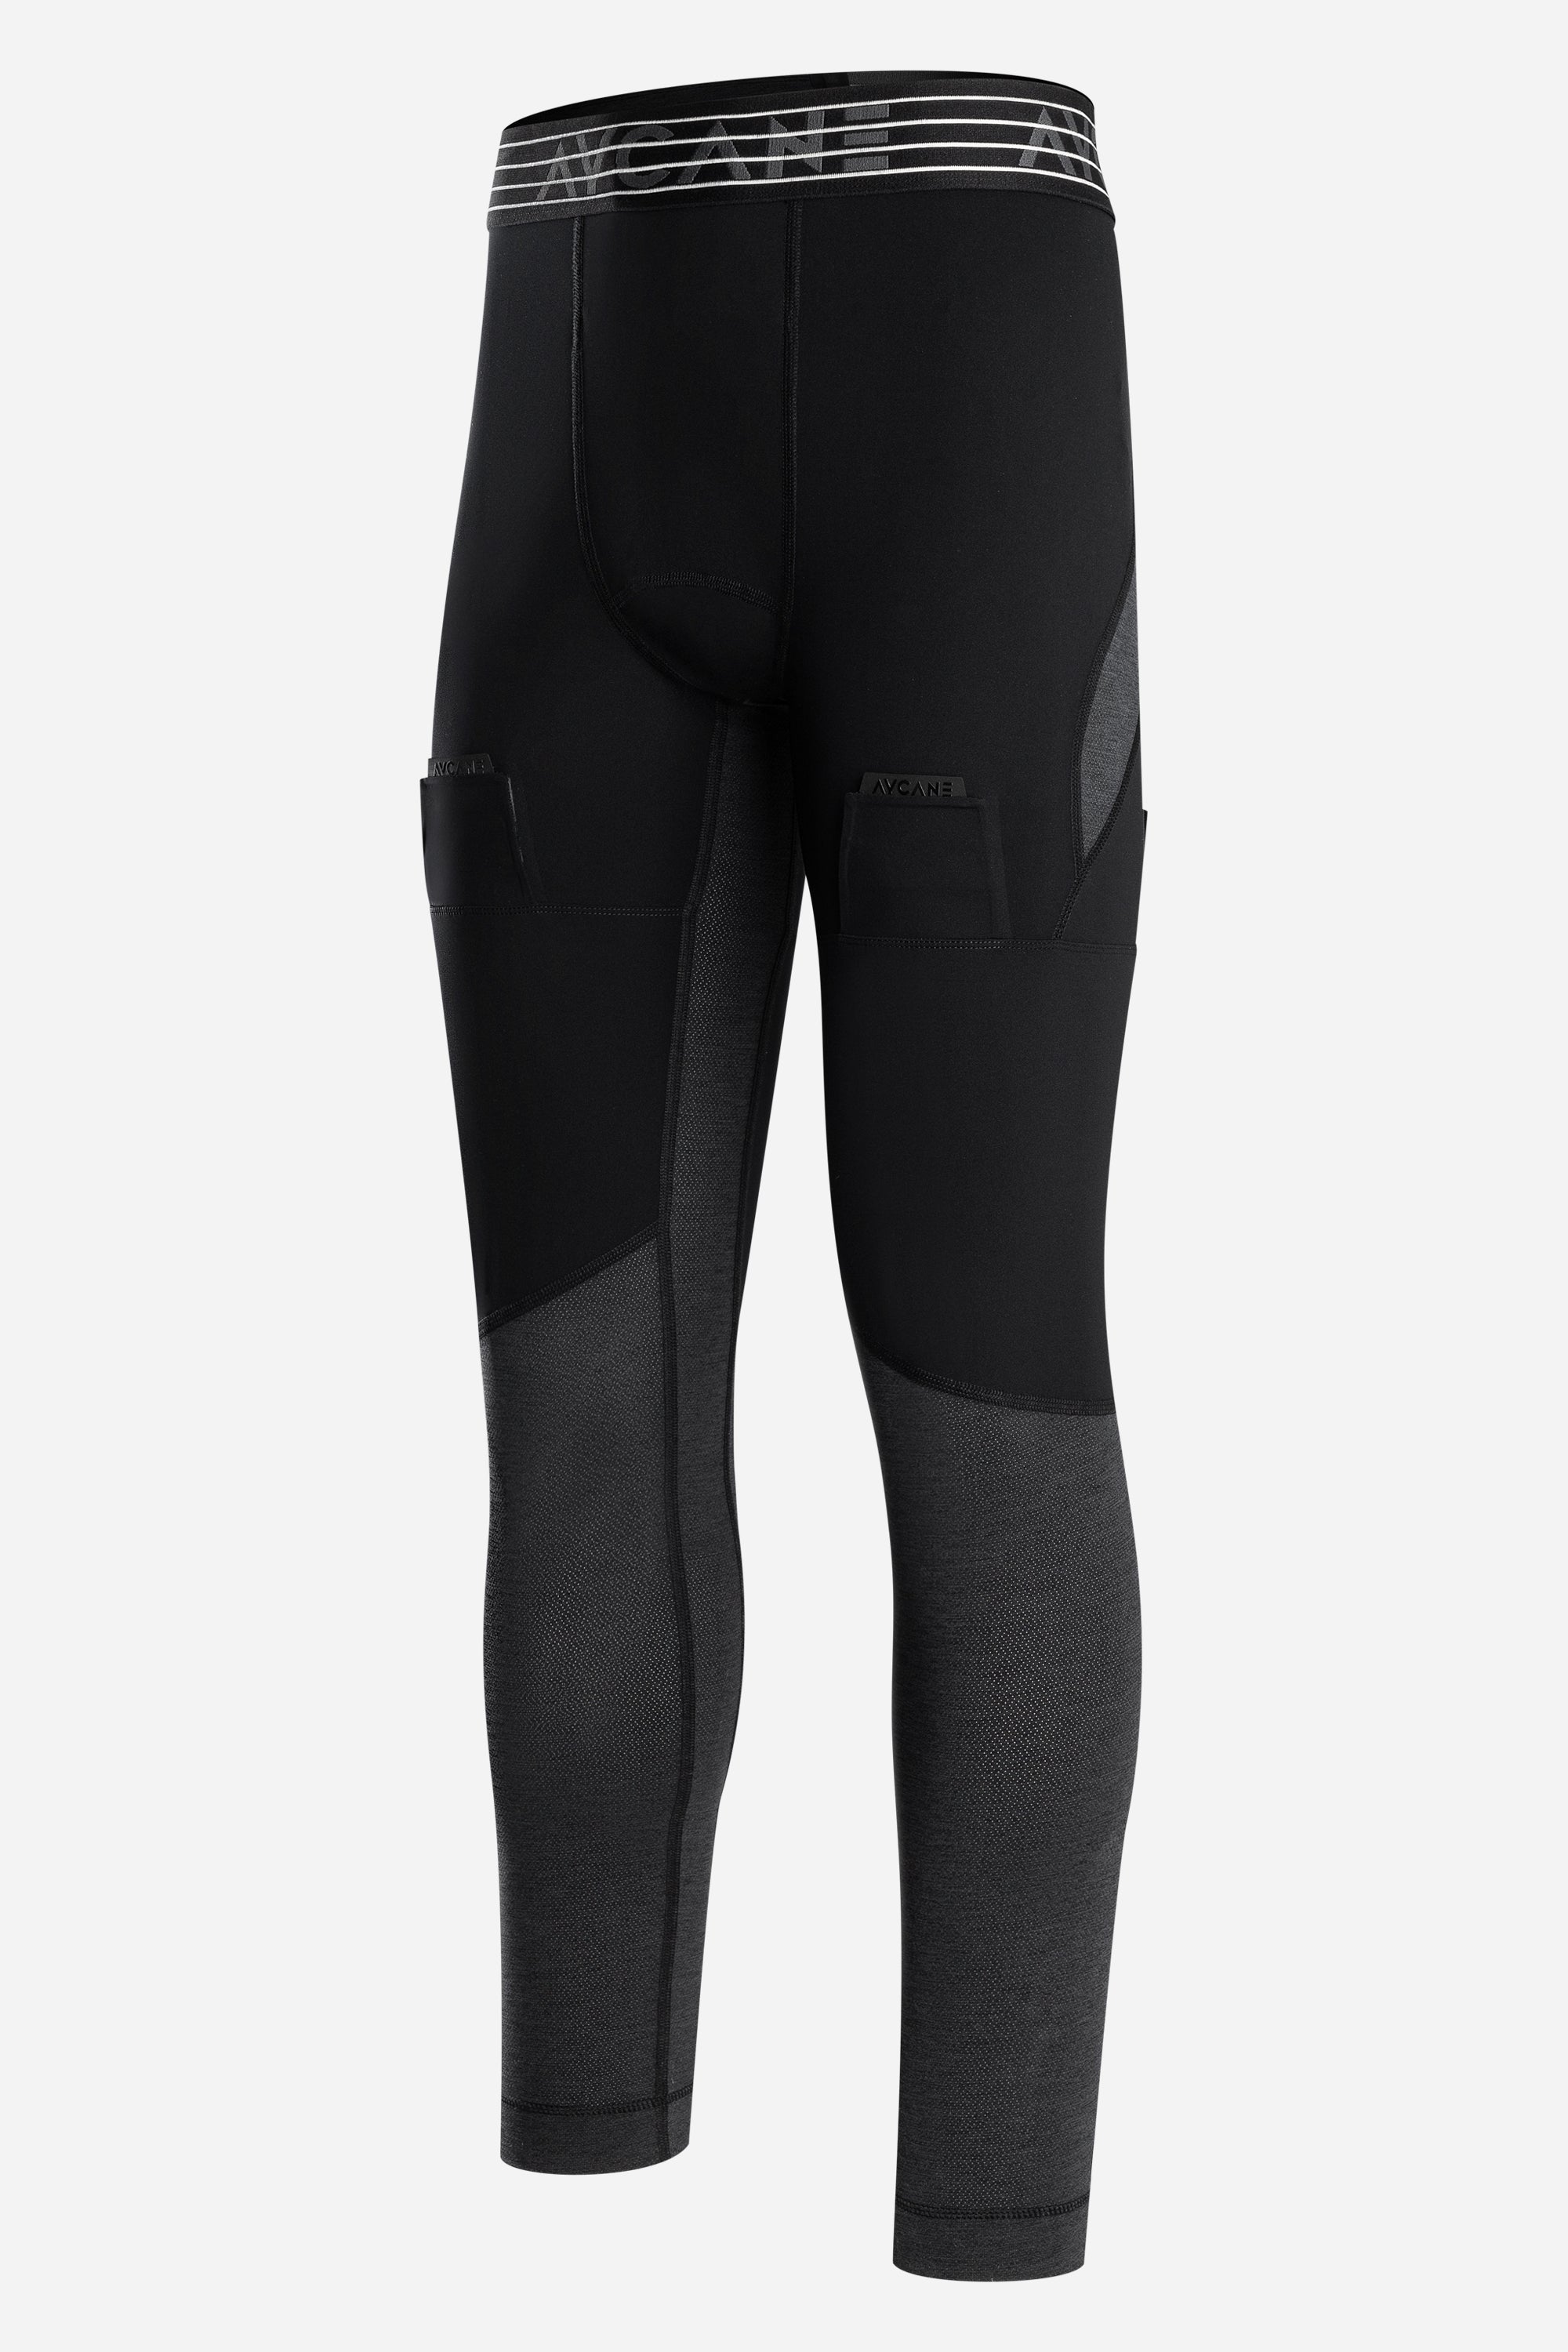 EMS Base Layers (Undergarment) - Be-Fit Technologies